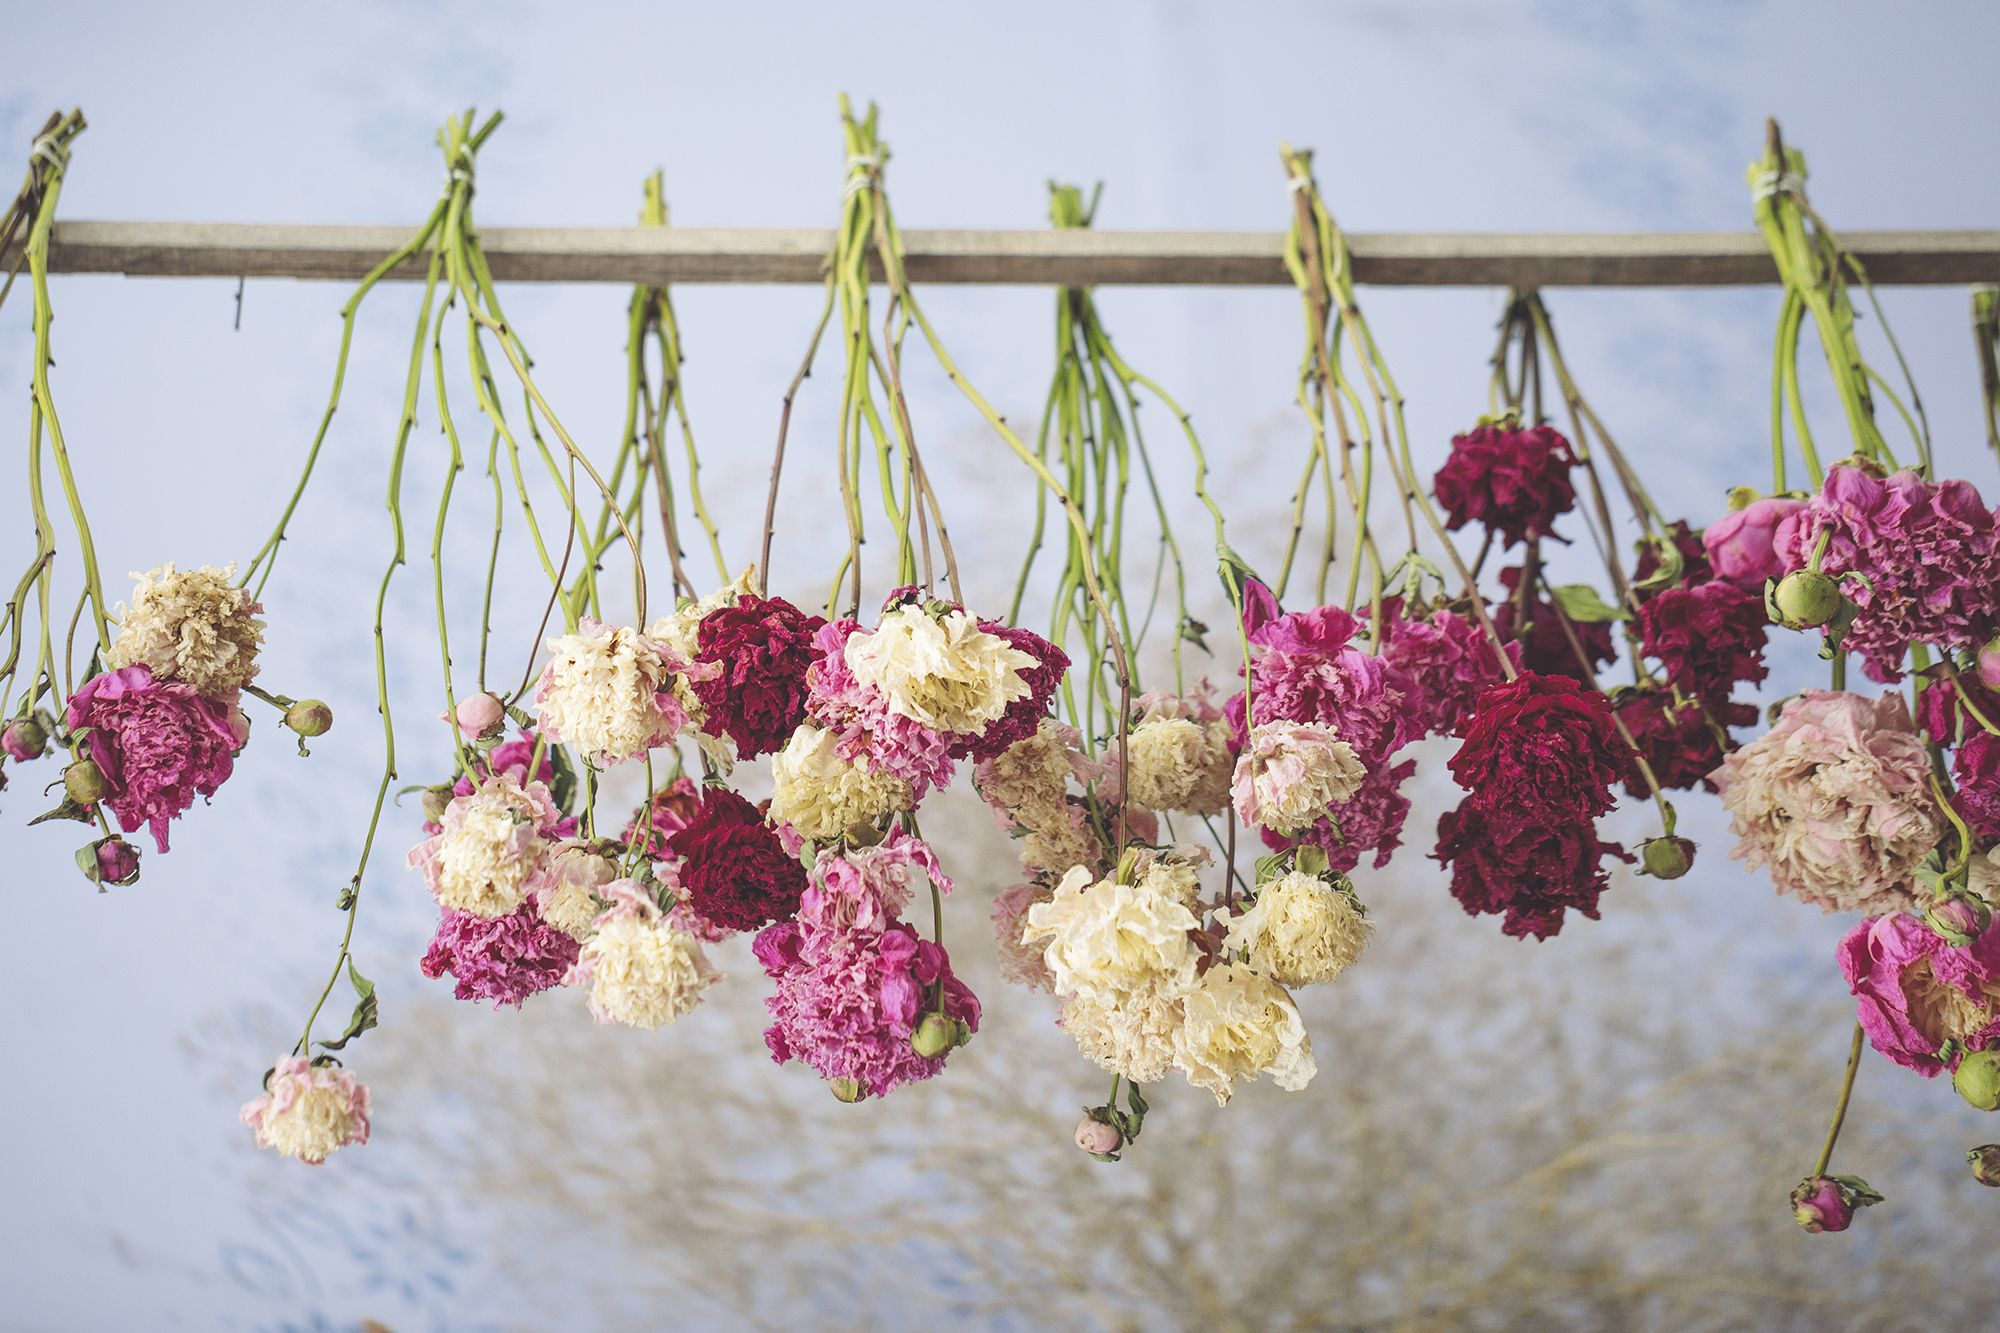 How to dry flowers in 4 simple steps